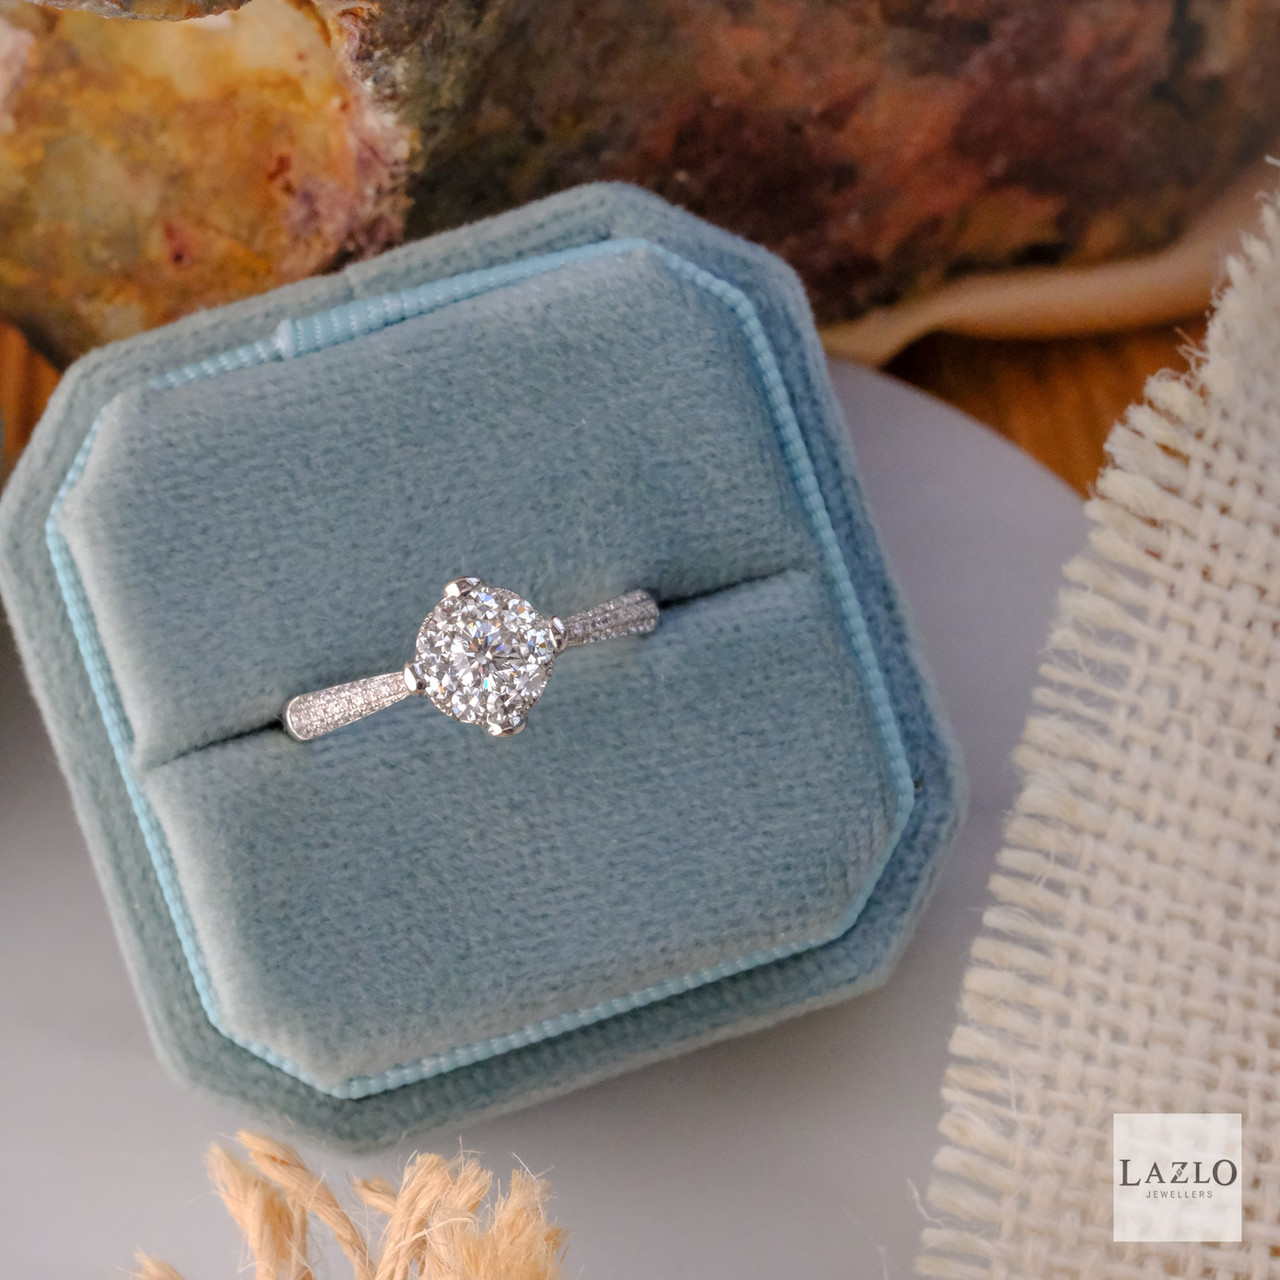 Micro Pavé Diamond Rings: What to Know Before You Buy